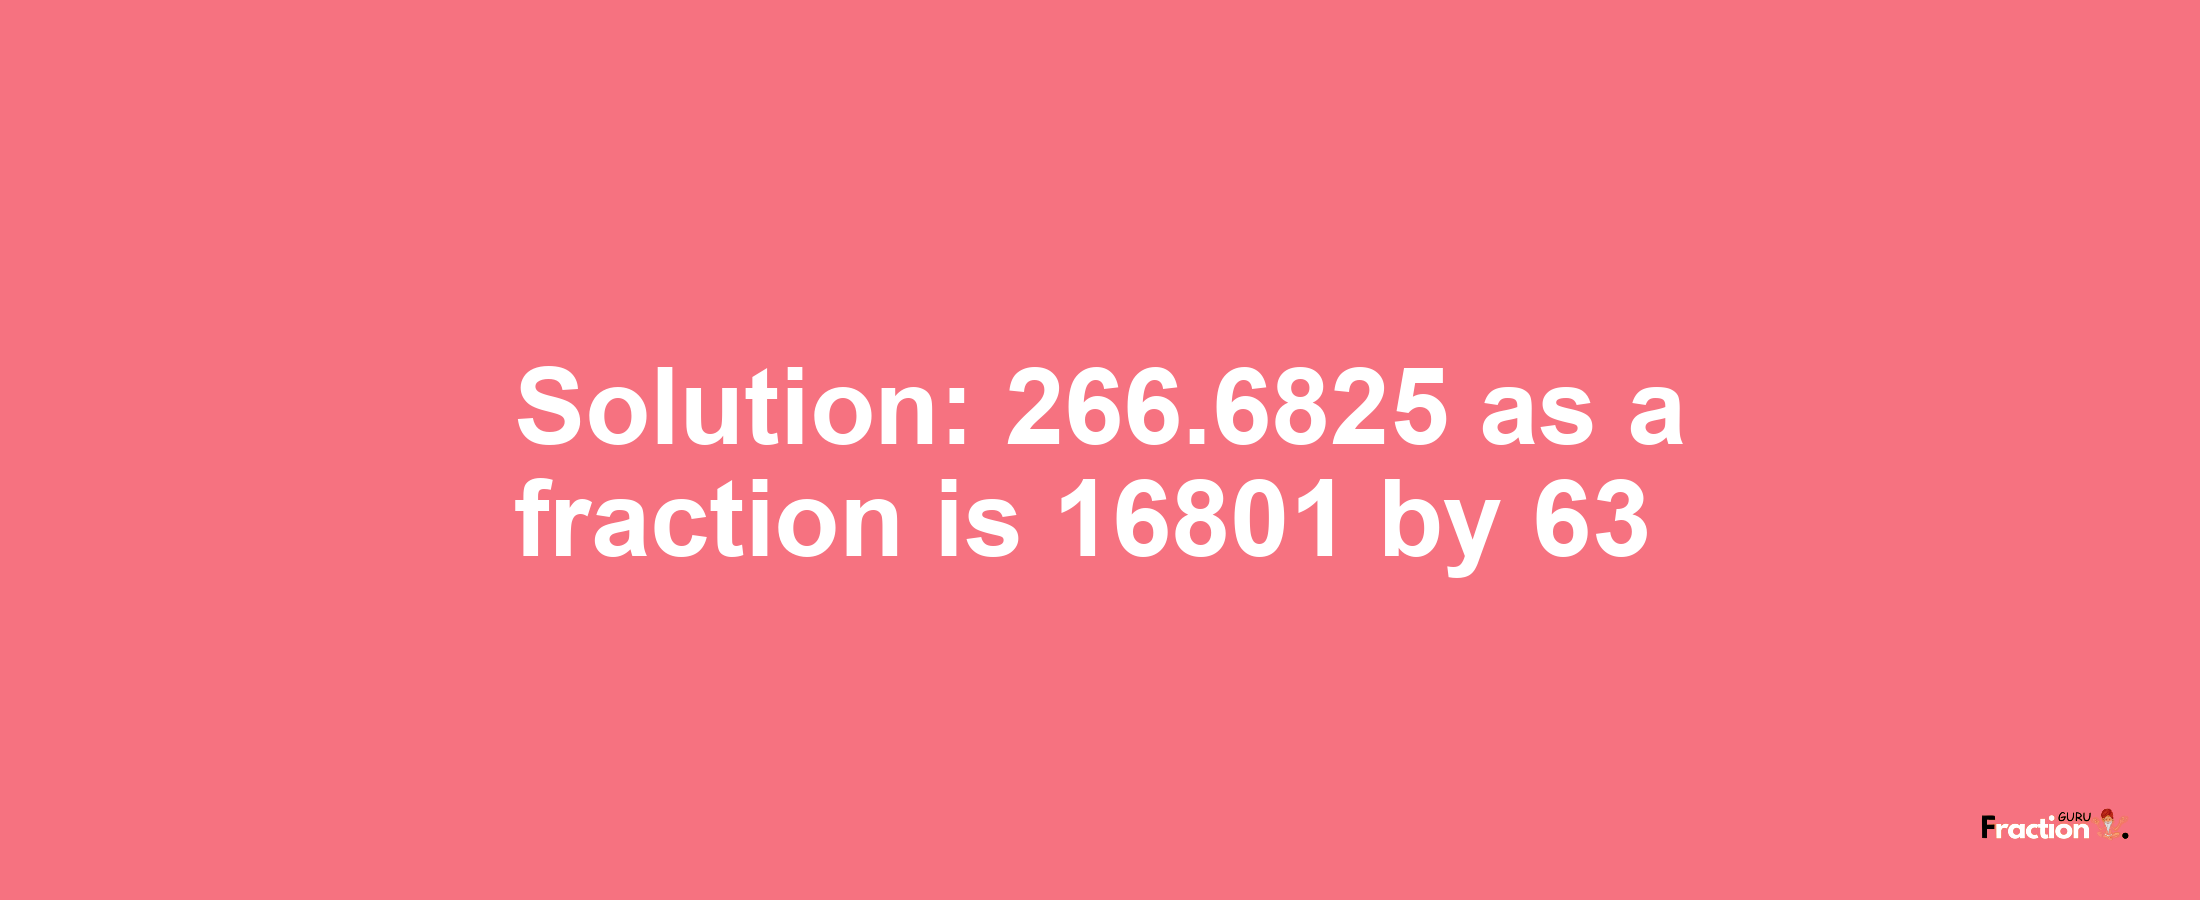 Solution:266.6825 as a fraction is 16801/63